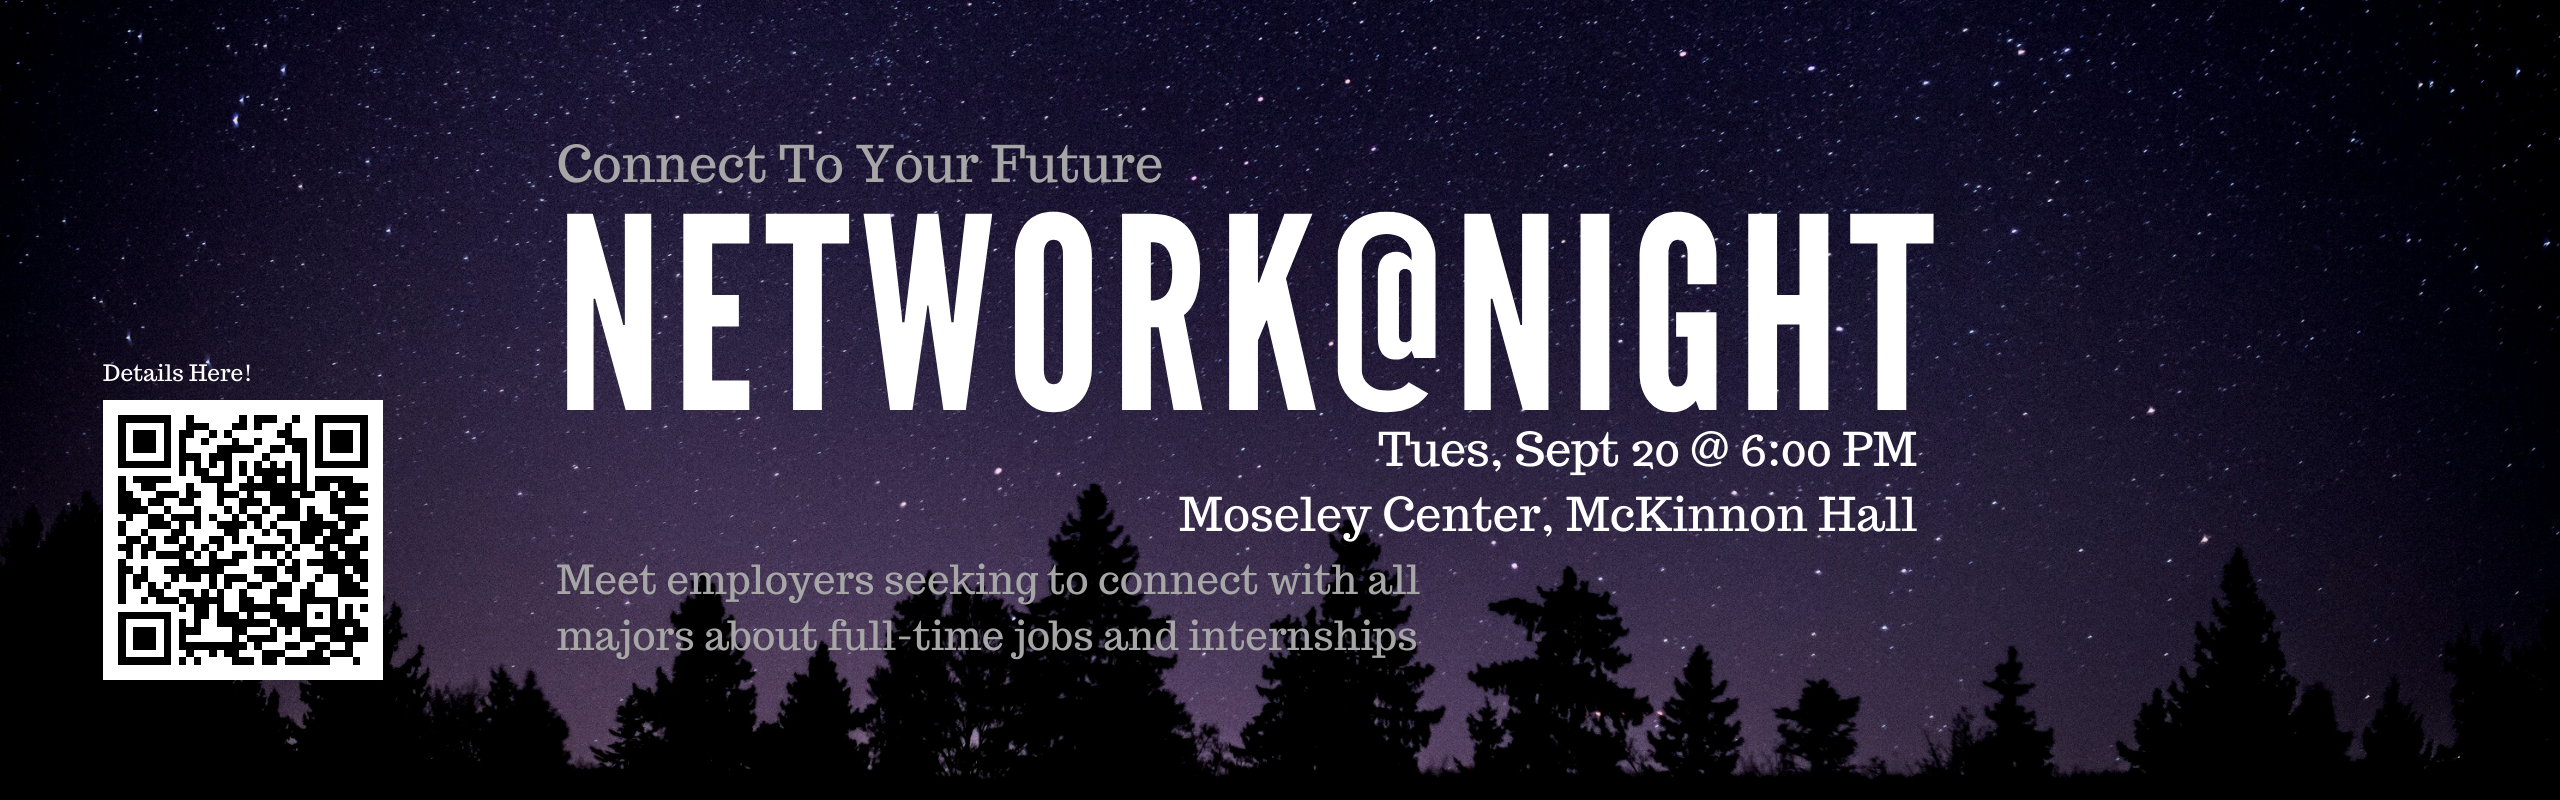 CONNECT TO YOUR FUTURE NETWORK AT NIGHT EMPLOYER ENGAGEMENT EVENT Sept 20 review the Elon Job Network (EJN) for details